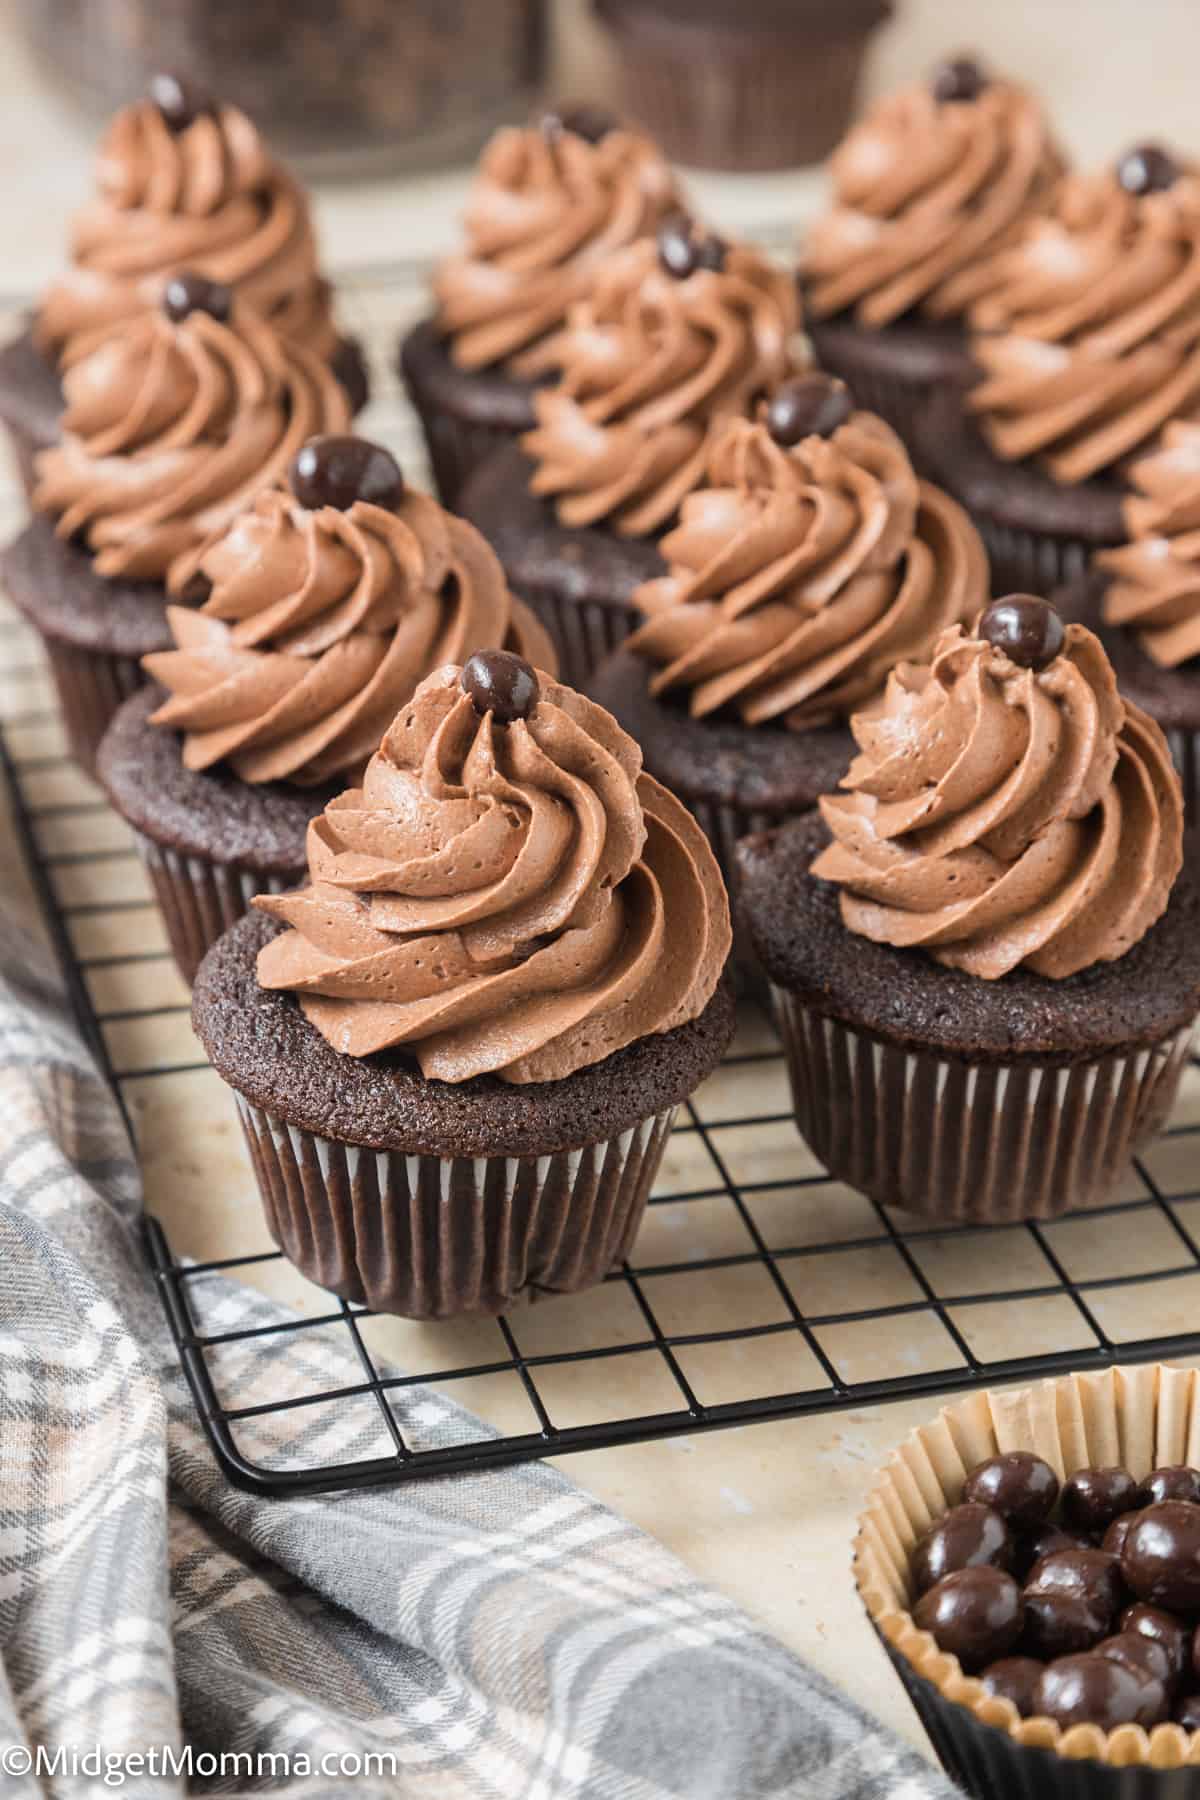 Mocha Cupcakes Recipe - Chocolate Coffee Cupcakes with Mocha Buttercream Frosting